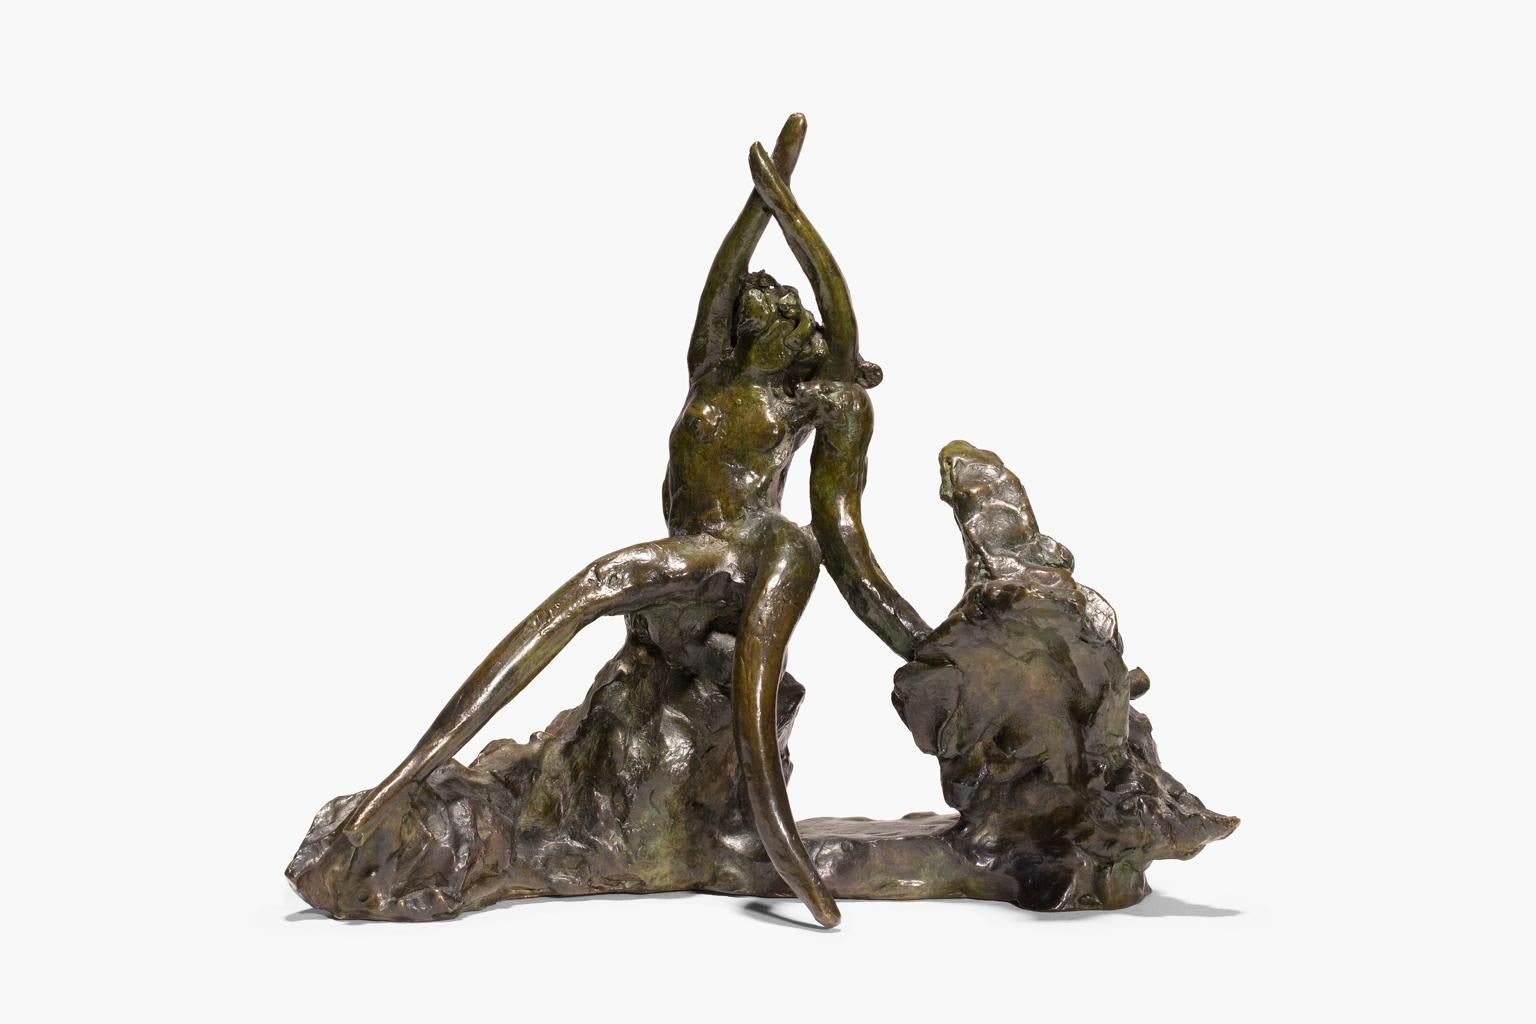 Reuben Nakian Figurative Sculpture - "Leda and the Swan", Bronze Sculpture, Signed and Numbered By Artist